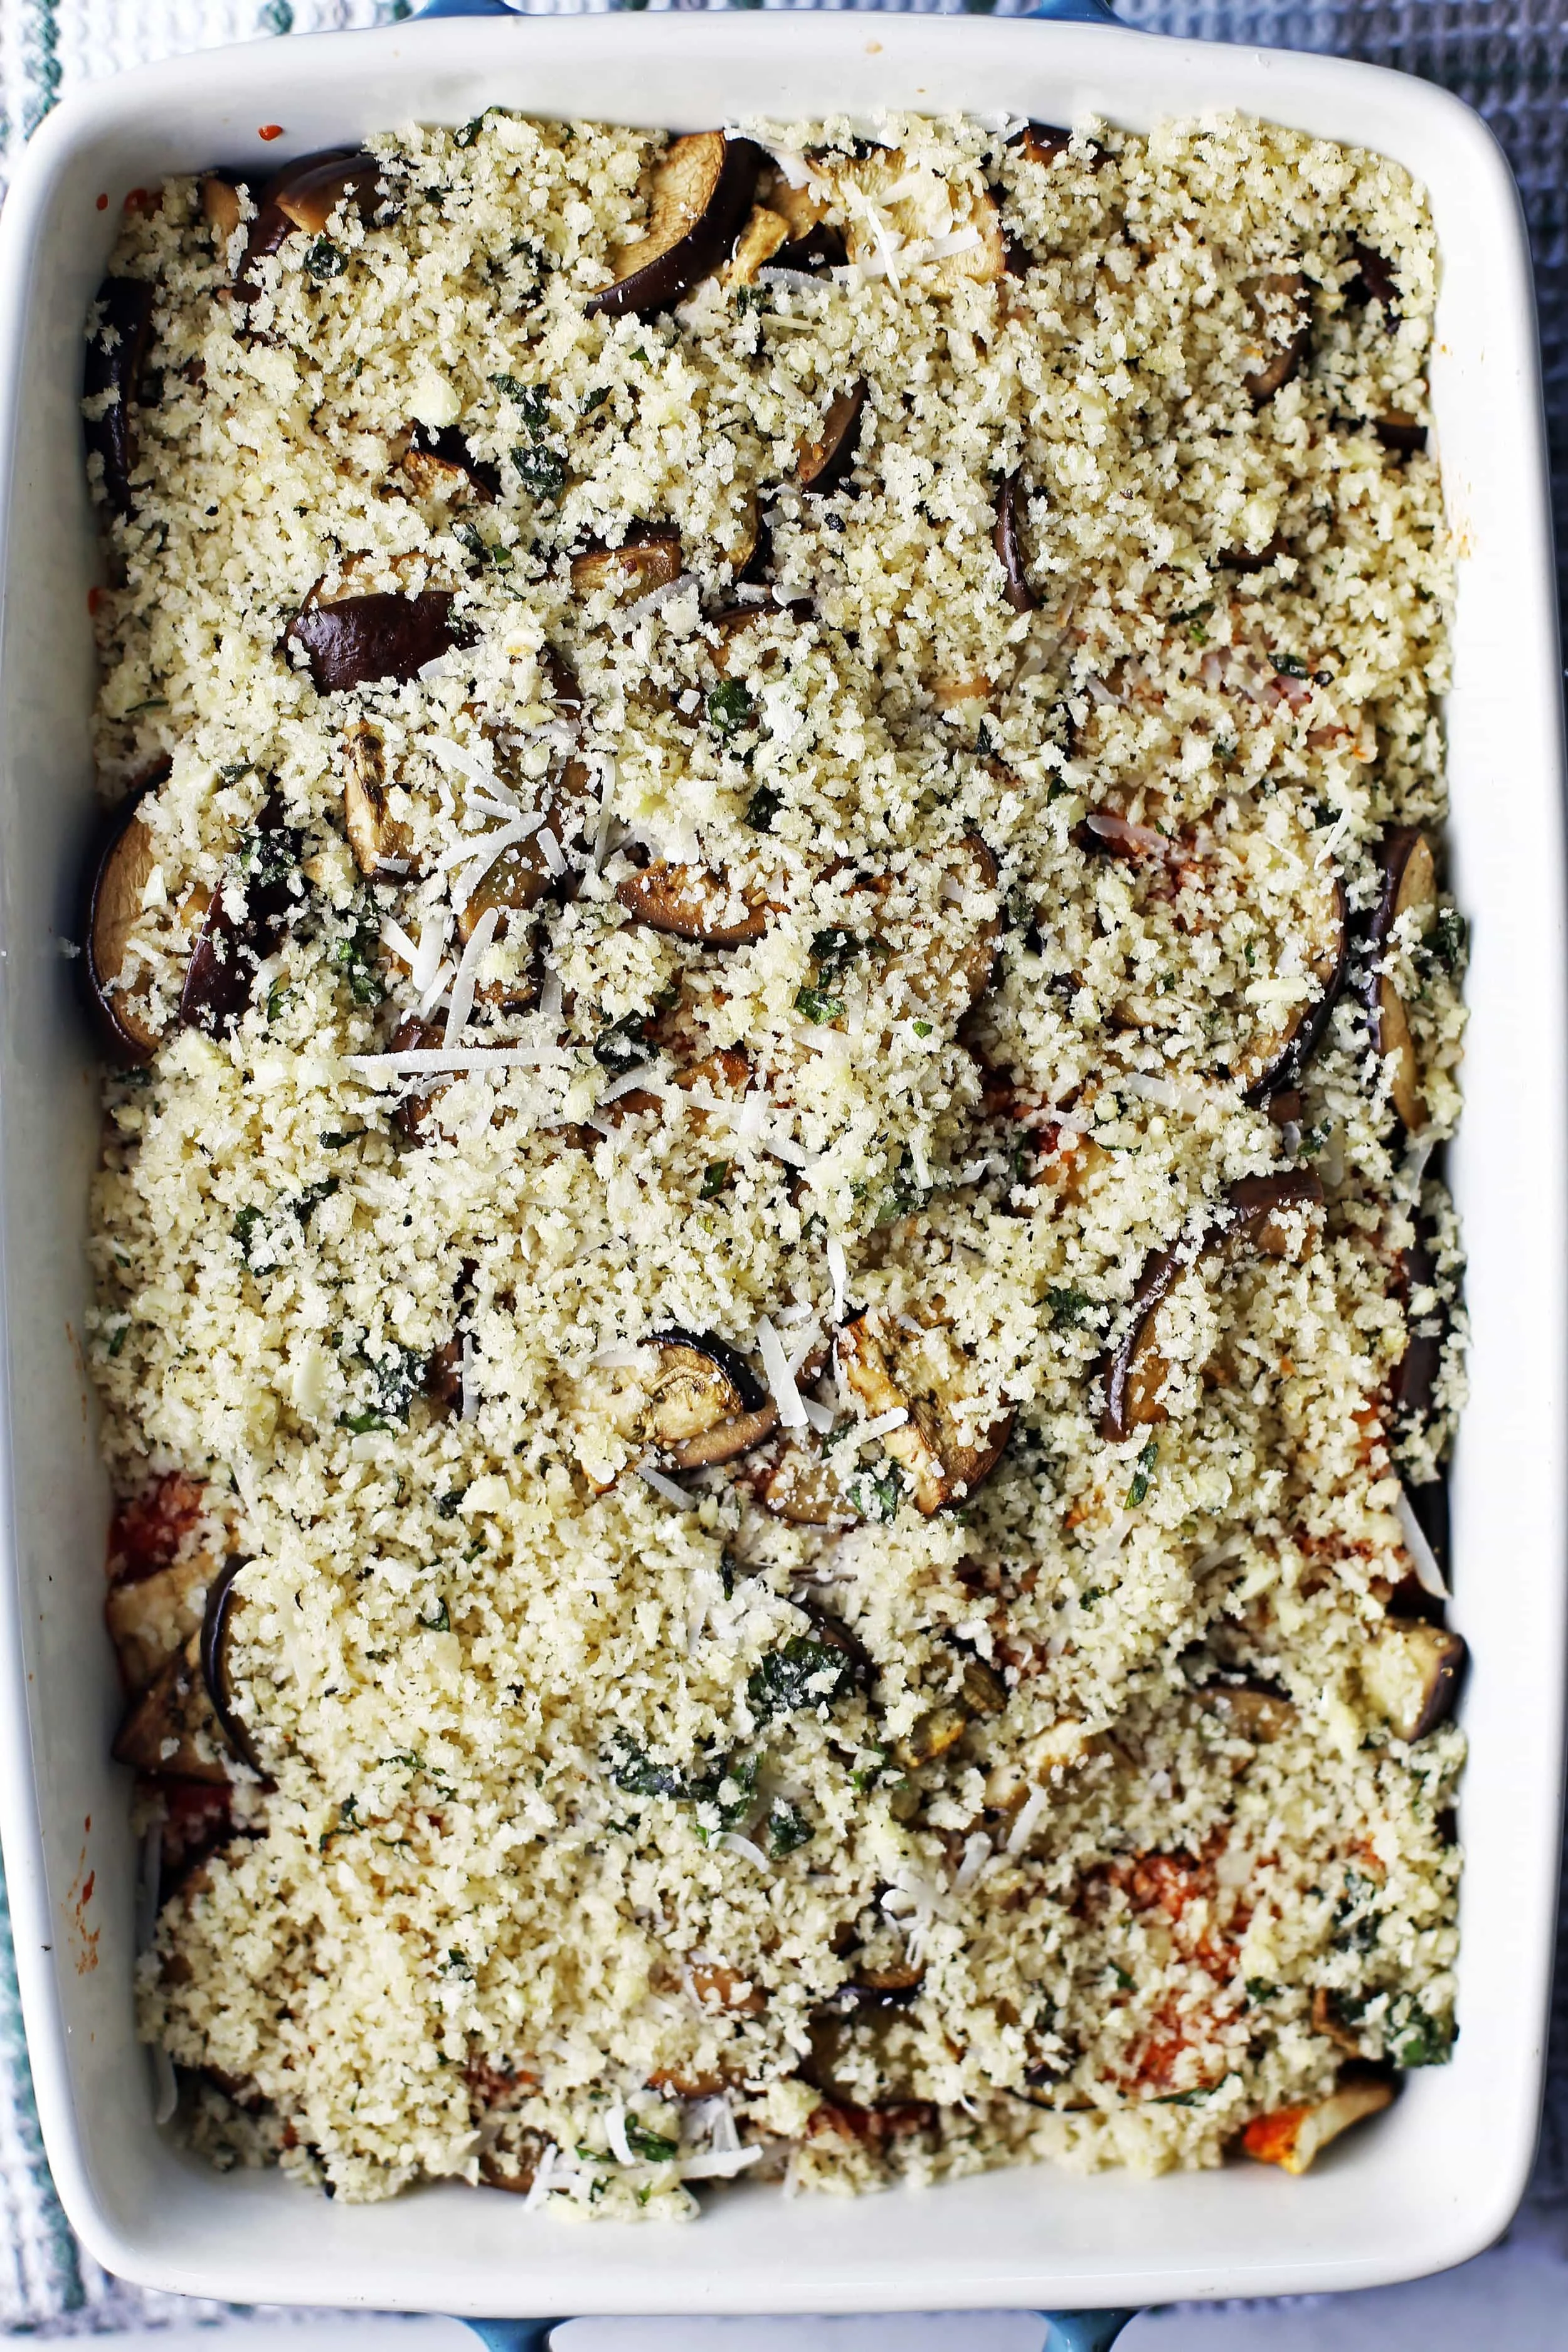 A large casserole dish containing three layers of marinara sauce, sliced eggplant, herbs, and cheeses with a breadcrumb topping.